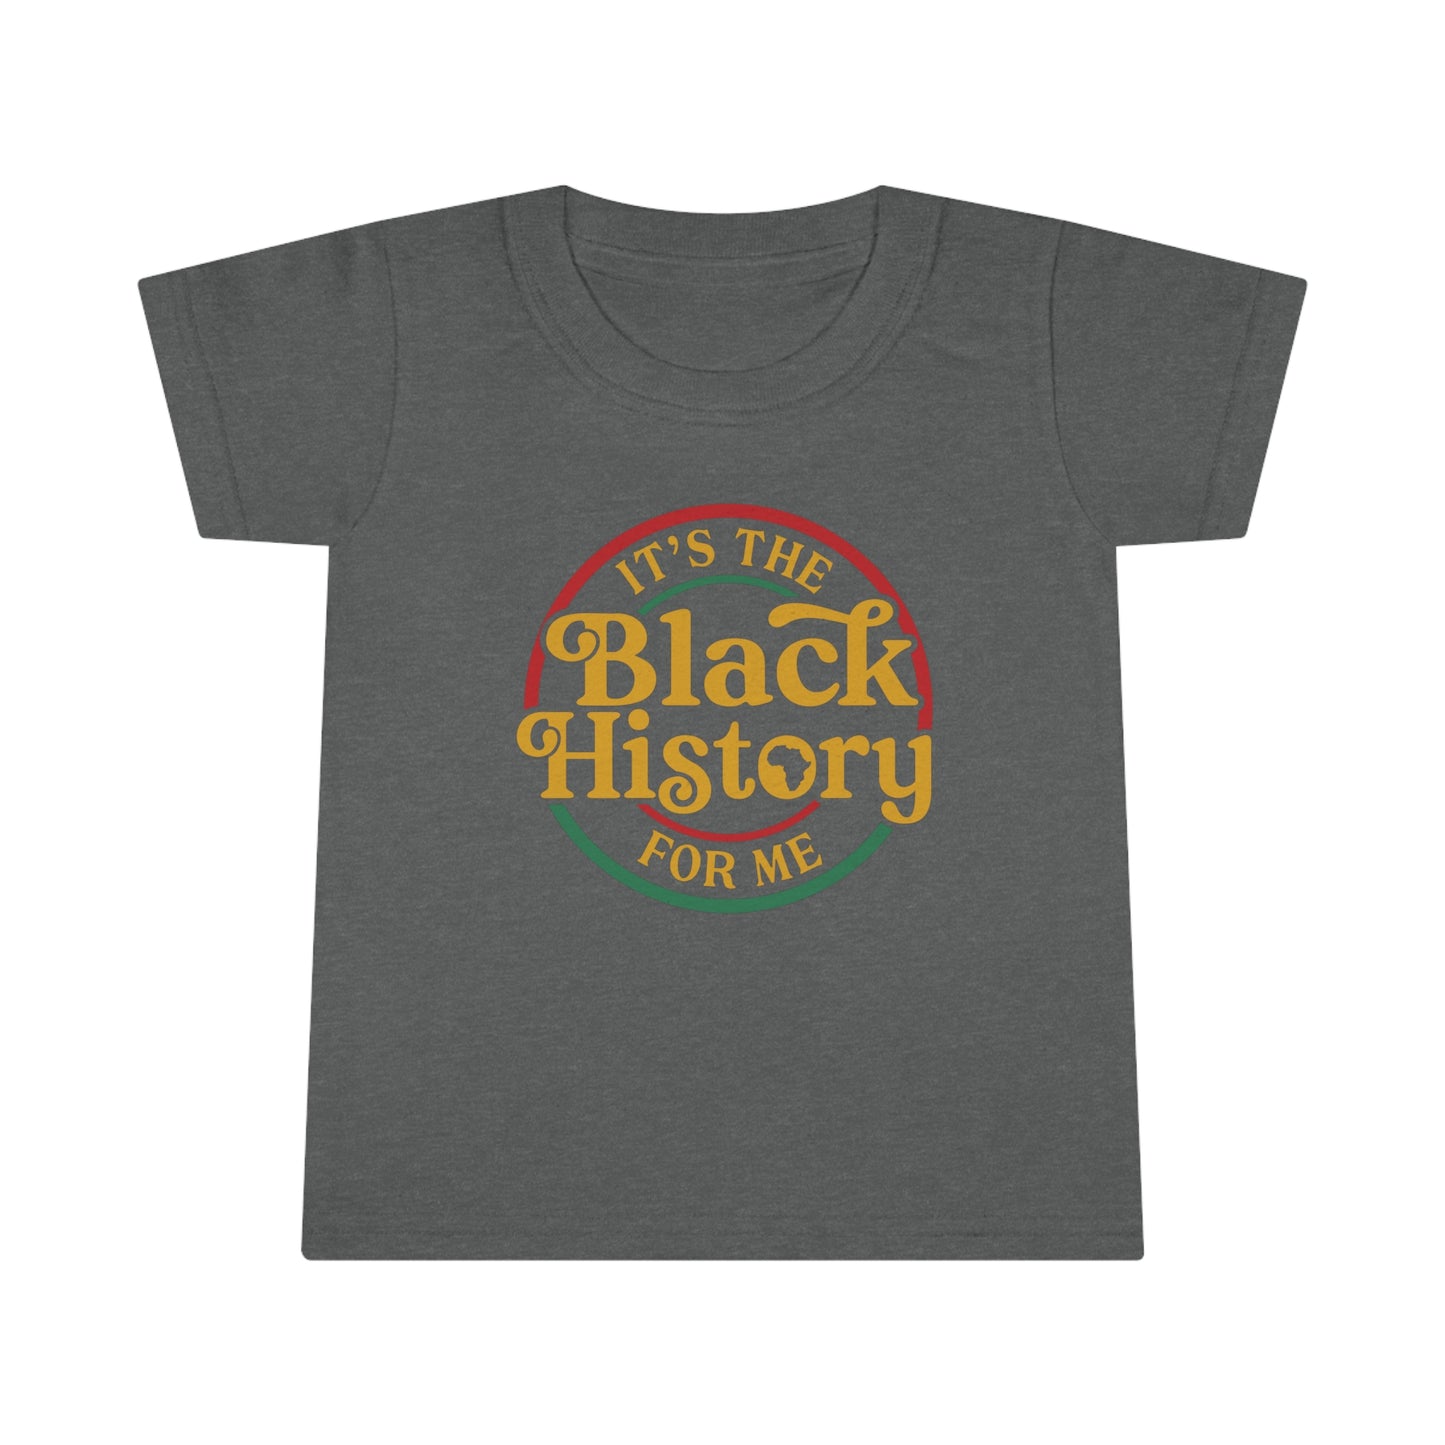 It's the Black history for me Toddler T-shirt